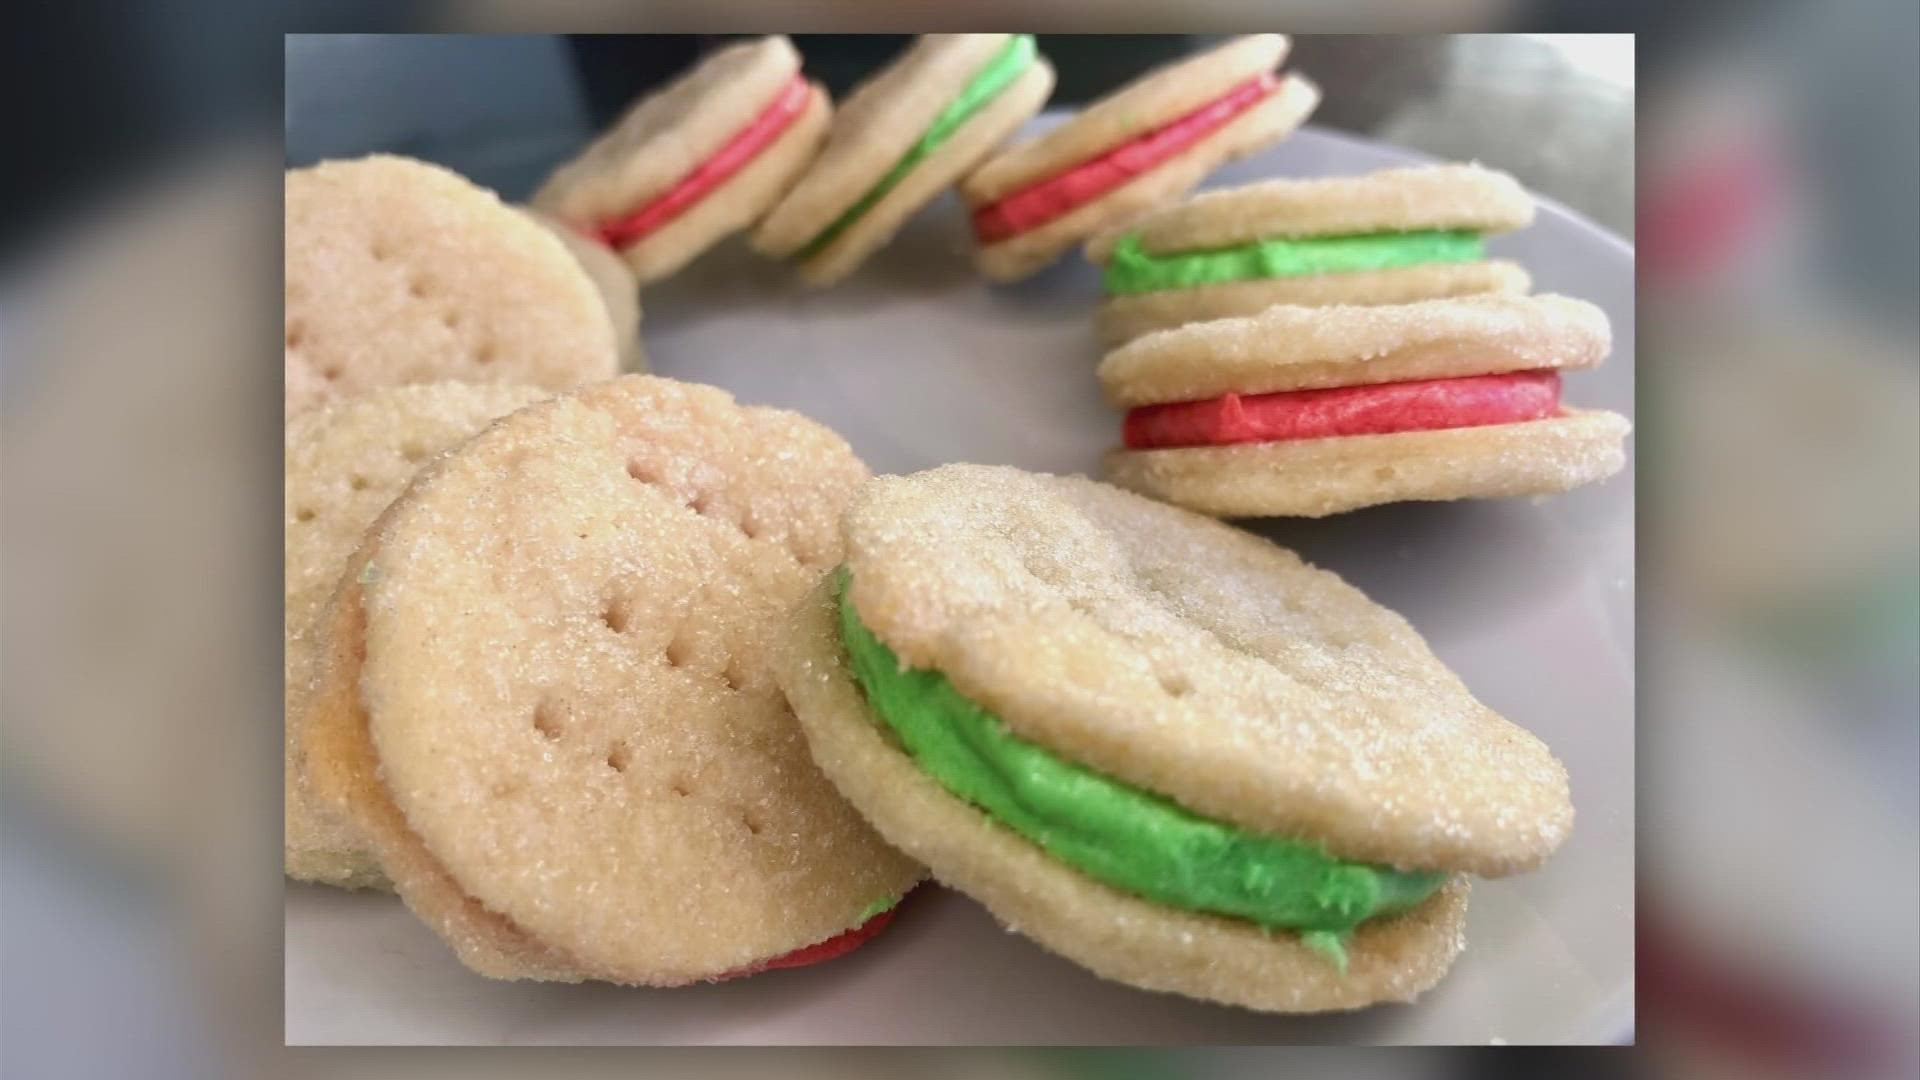 These cookies are a perfect addition to any holiday gathering.